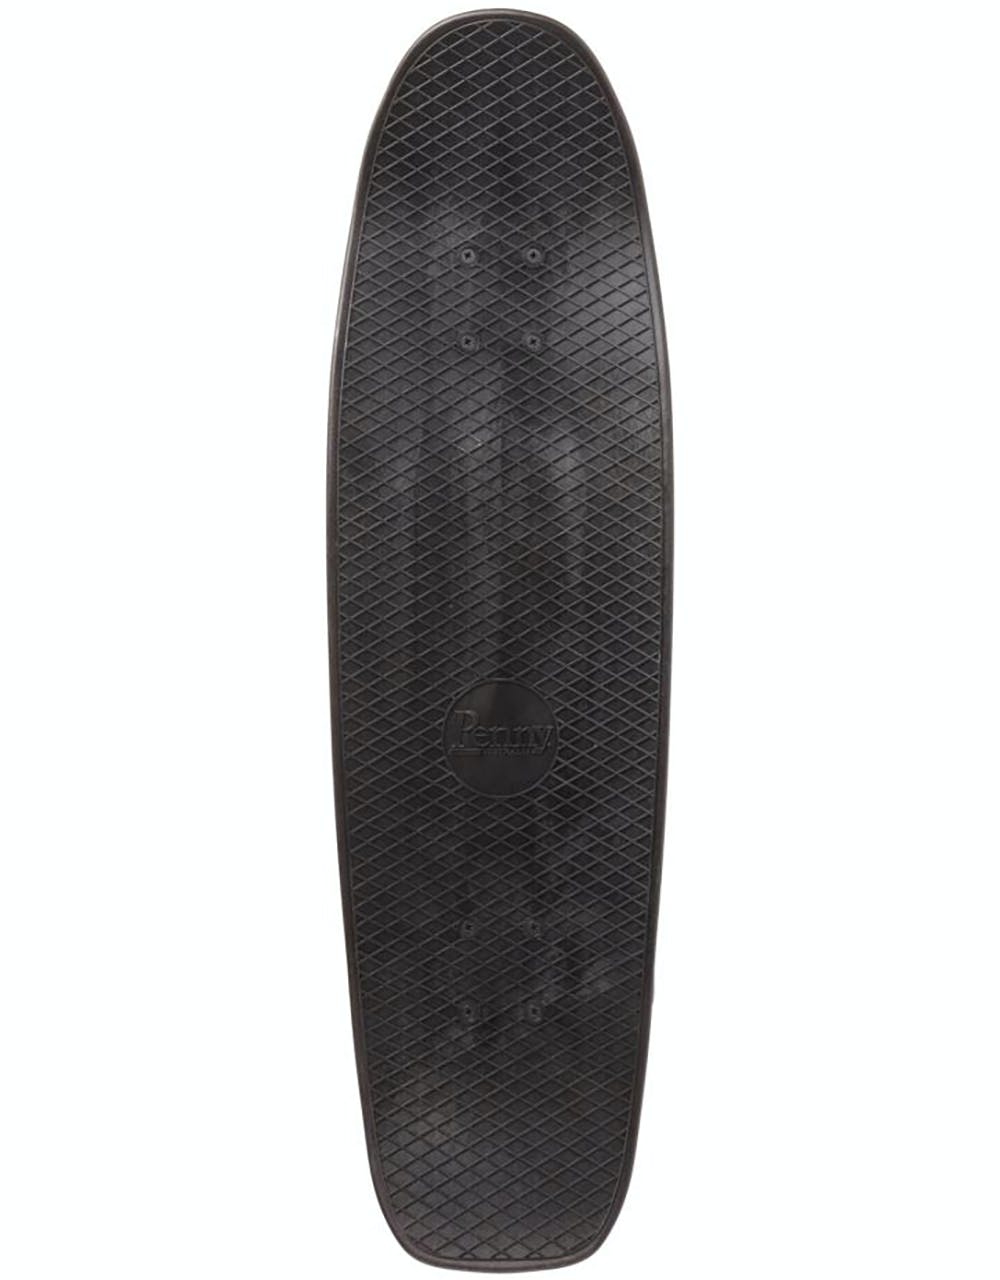 Penny Skateboards Classic Concave Cruiser - 32" - Blackout